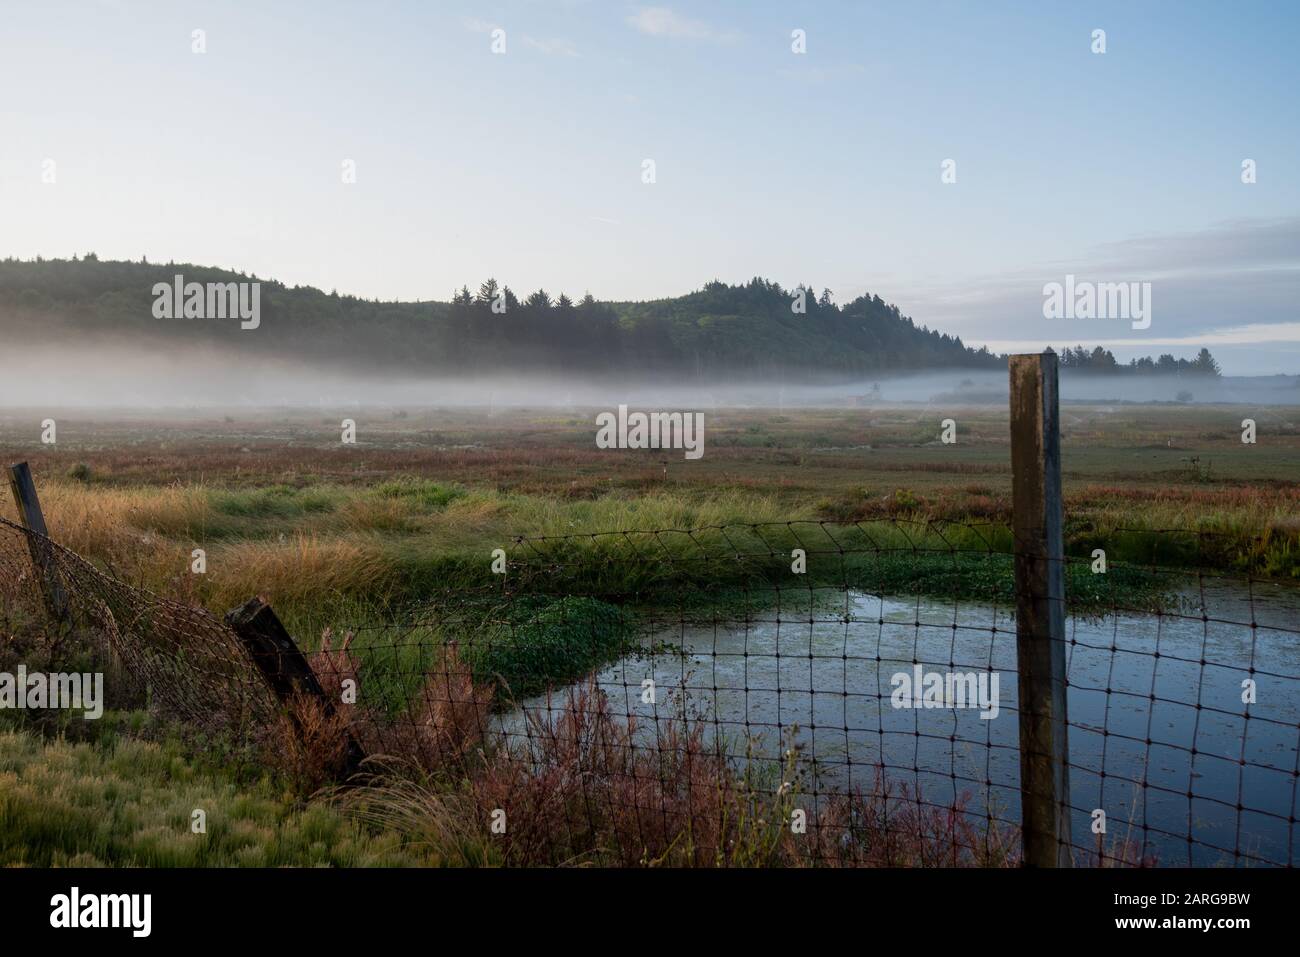 Early foggy morning in the Pacific Northwest with an old wire fence around a pond. Stock Photo